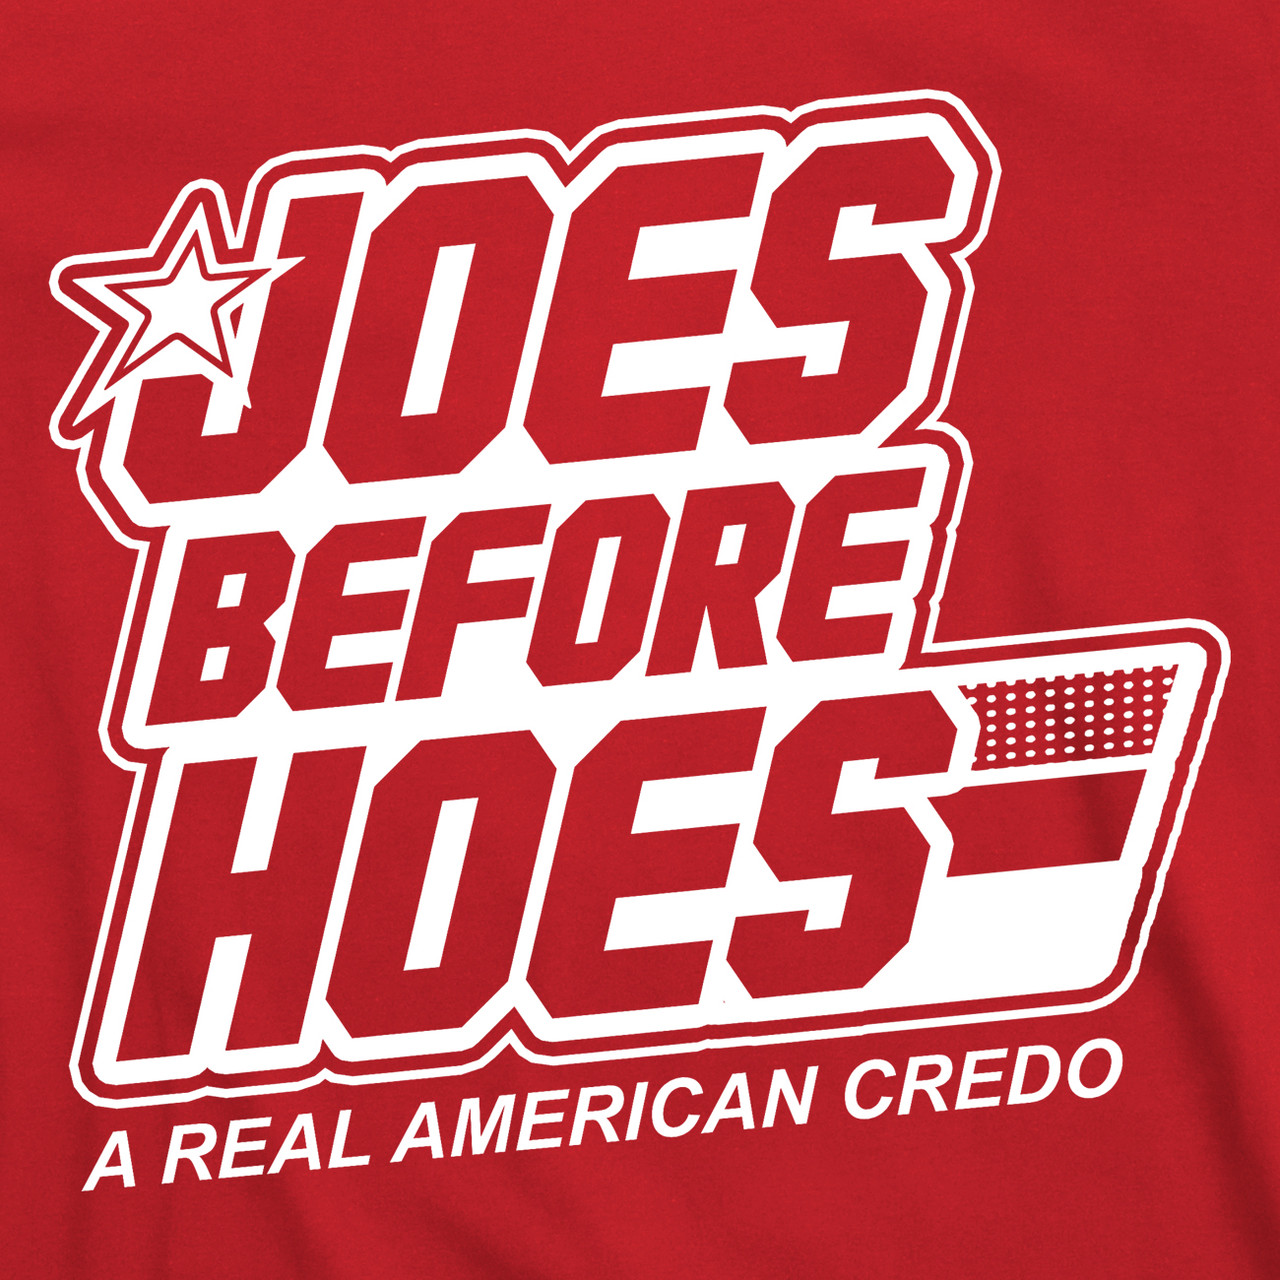 STROS BEFORE HOES T Shirt